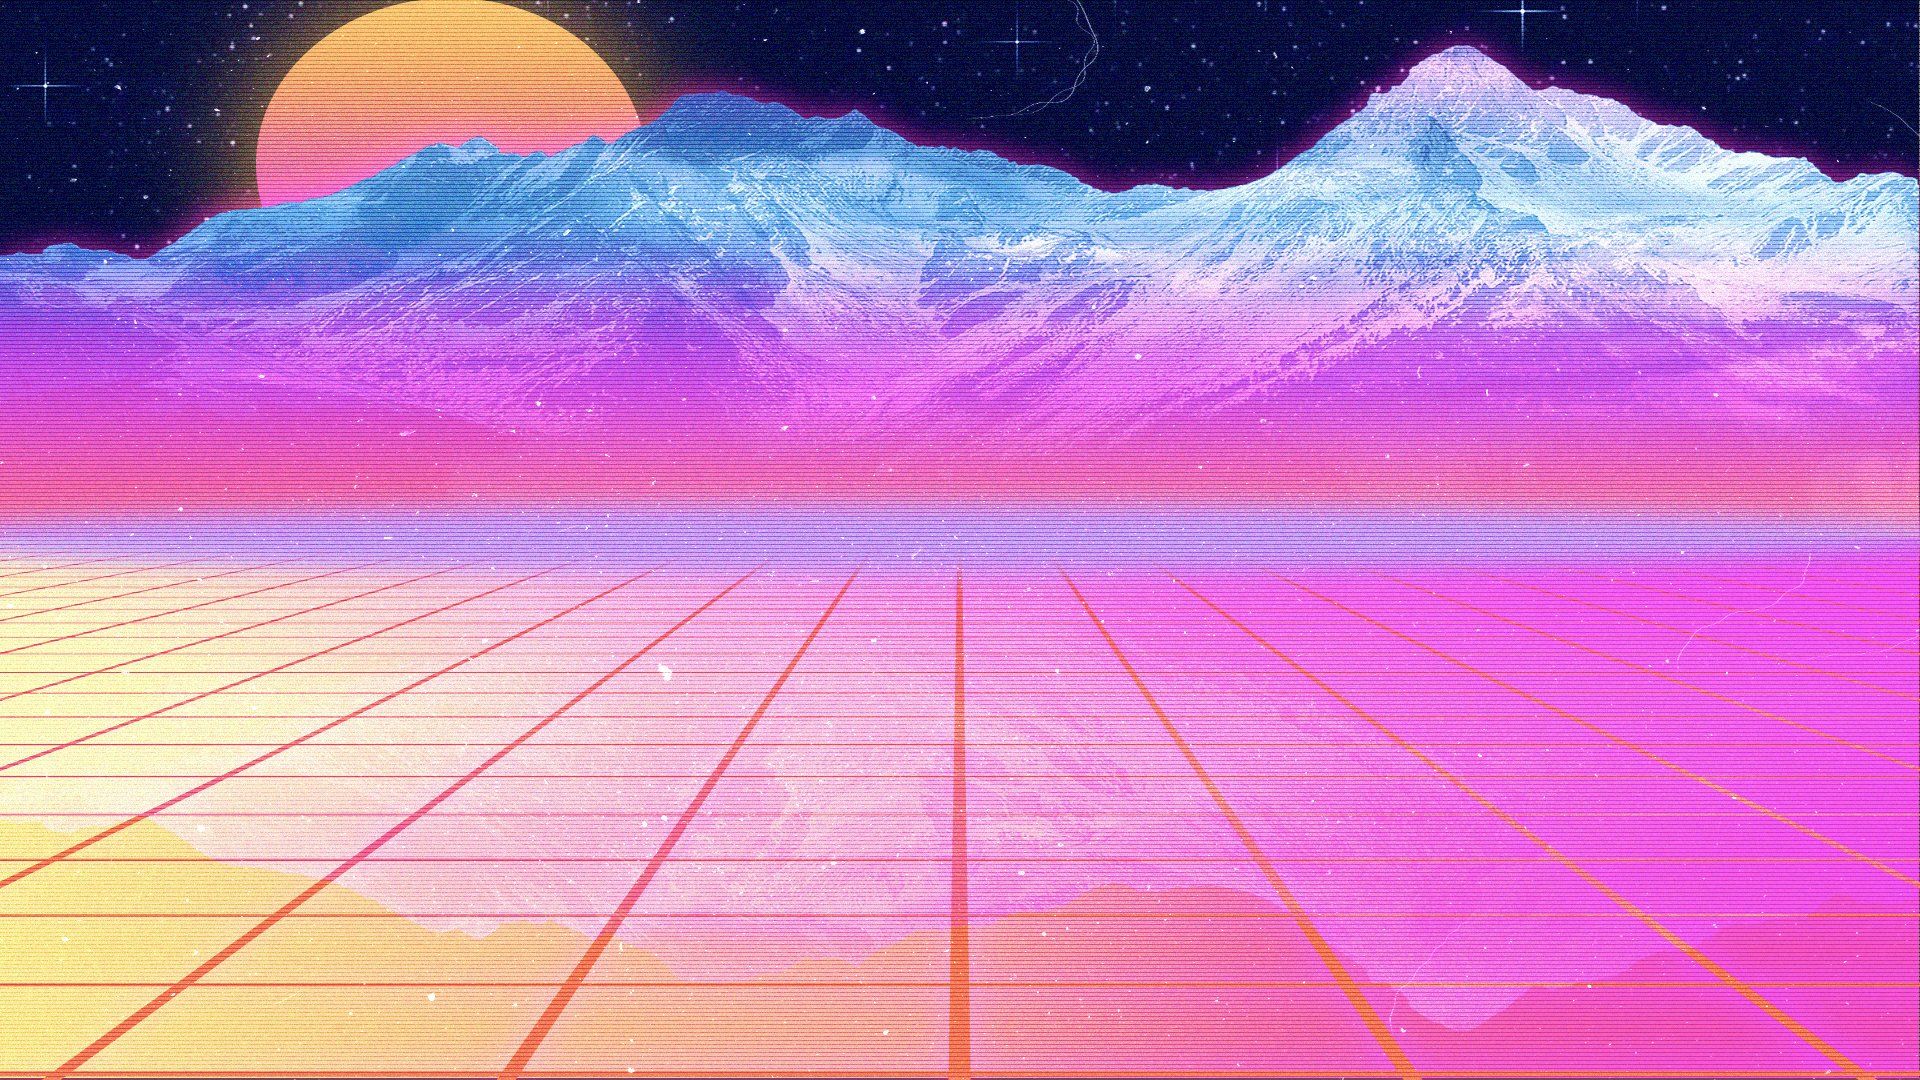 Aesthetic Vaporwave Ps4 Wallpapers - Wallpaper Cave